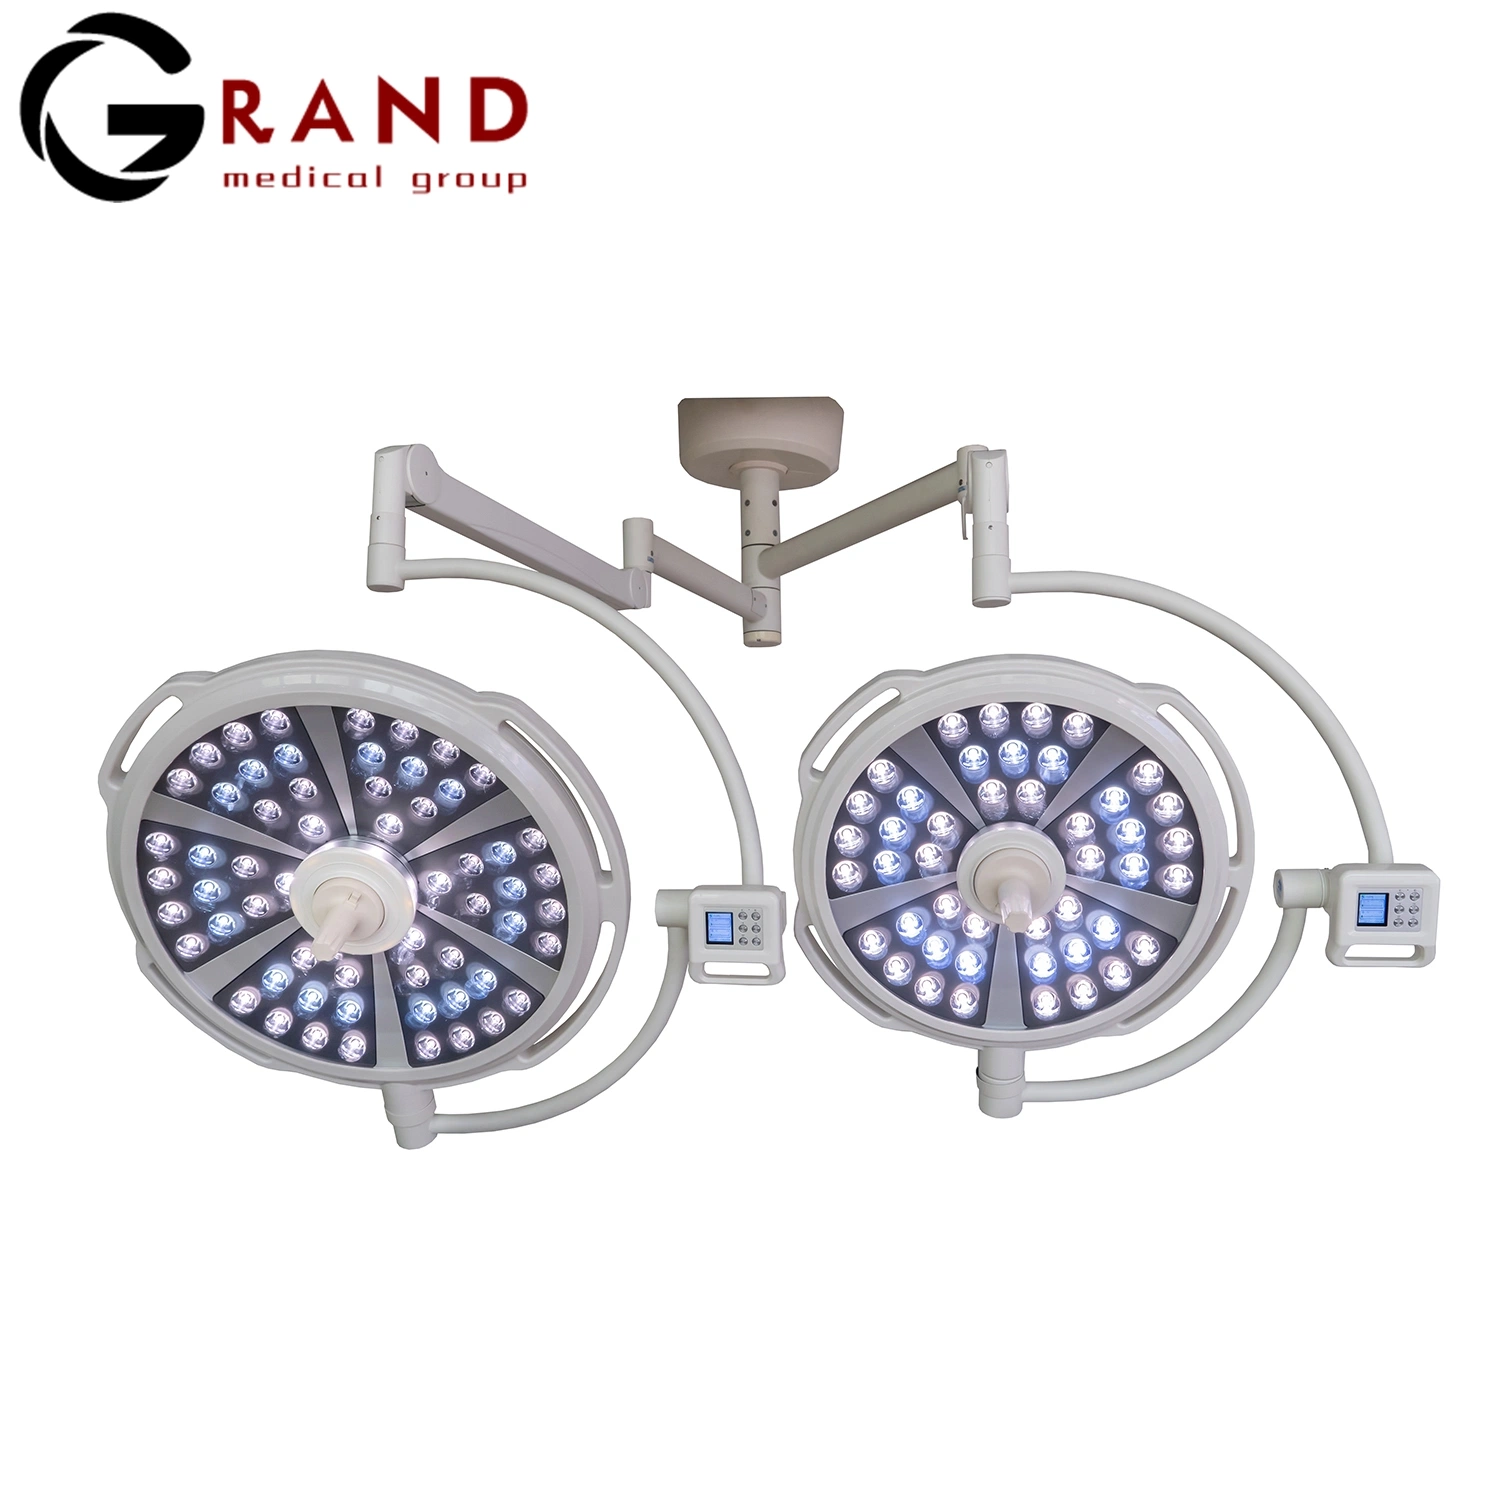 LED Shadowless Operating Theatre Lamp Surgical Light